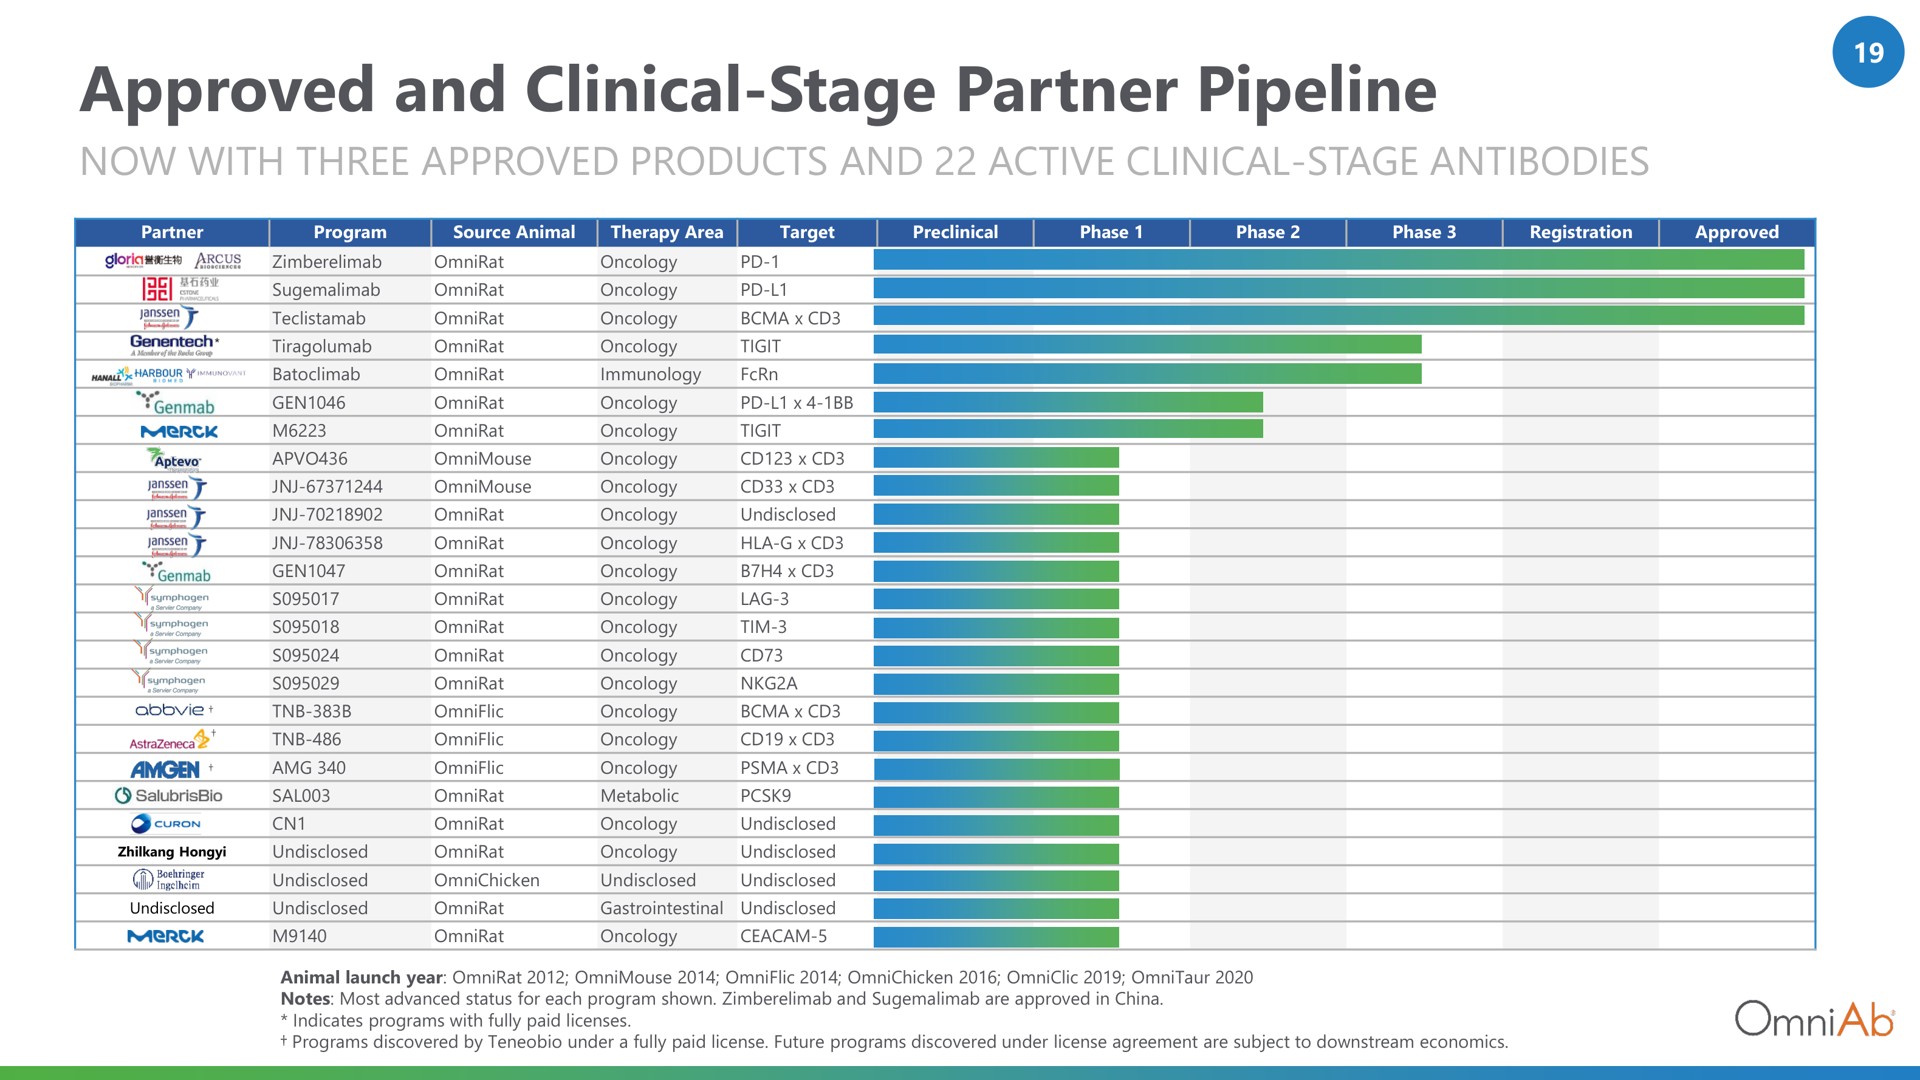 approved and clinical stage partner pipeline | OmniAb